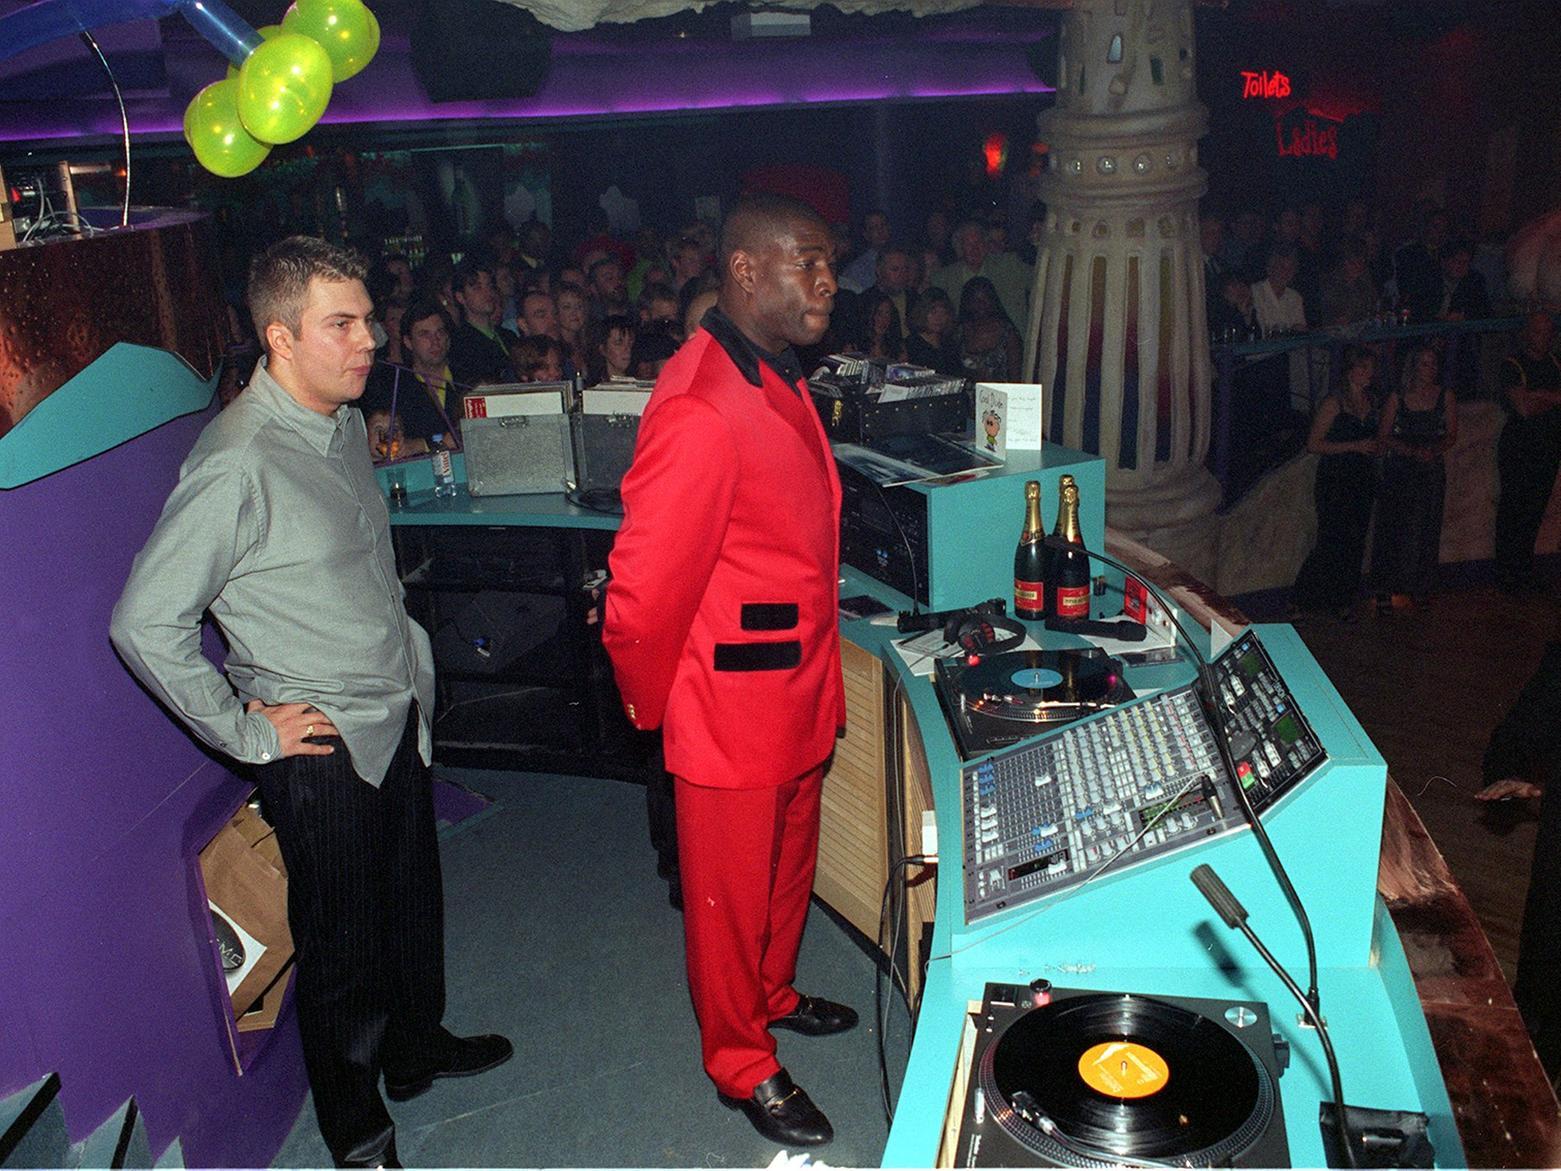 Frank Bruno addresses clubbers in the DJ booth.